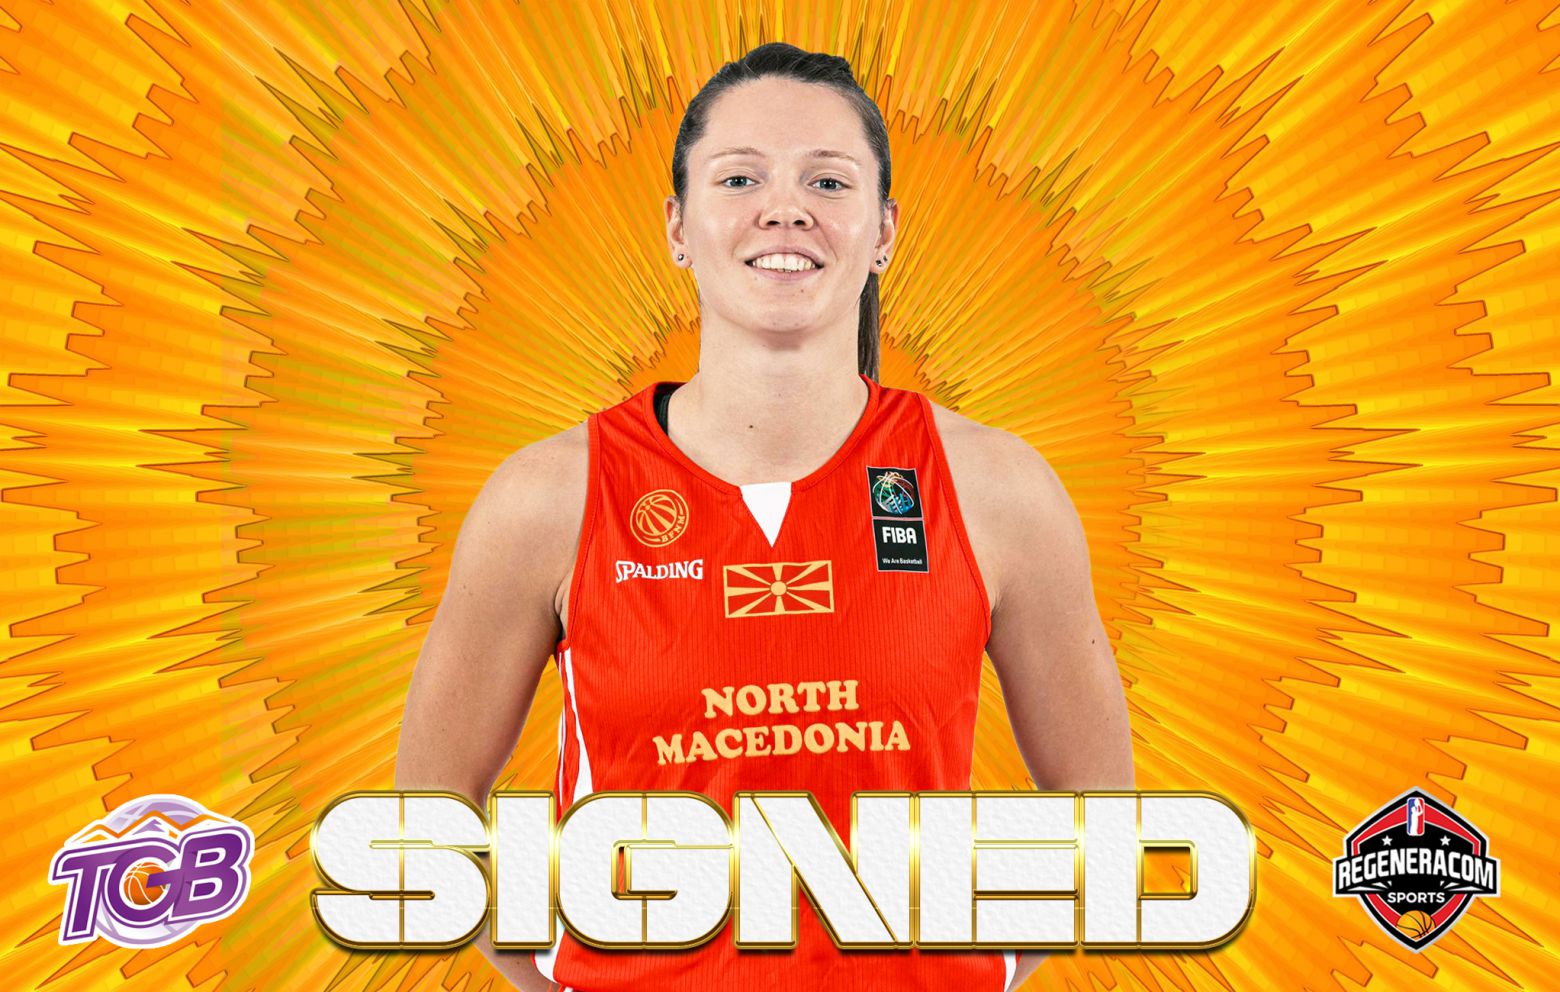 ANDZELIKA MITRASINOVIC has signed in France with Tarbes for the 2021/22 season